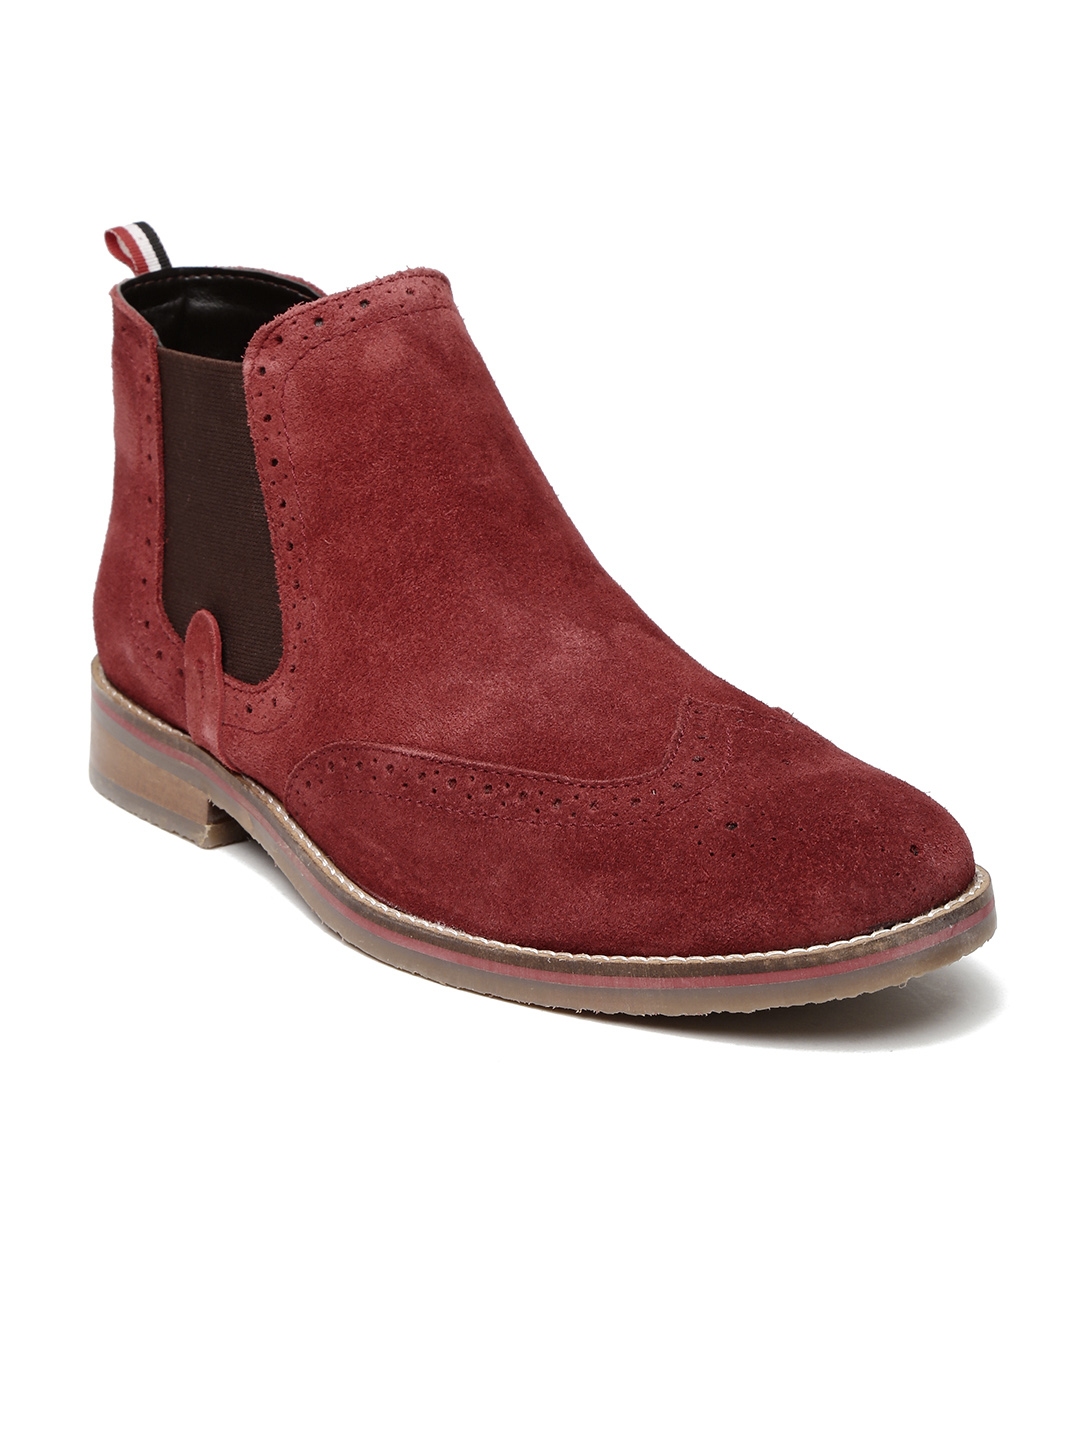 Buy Bata Men Suede Chelsea Boots Boots for 1124270 | Myntra